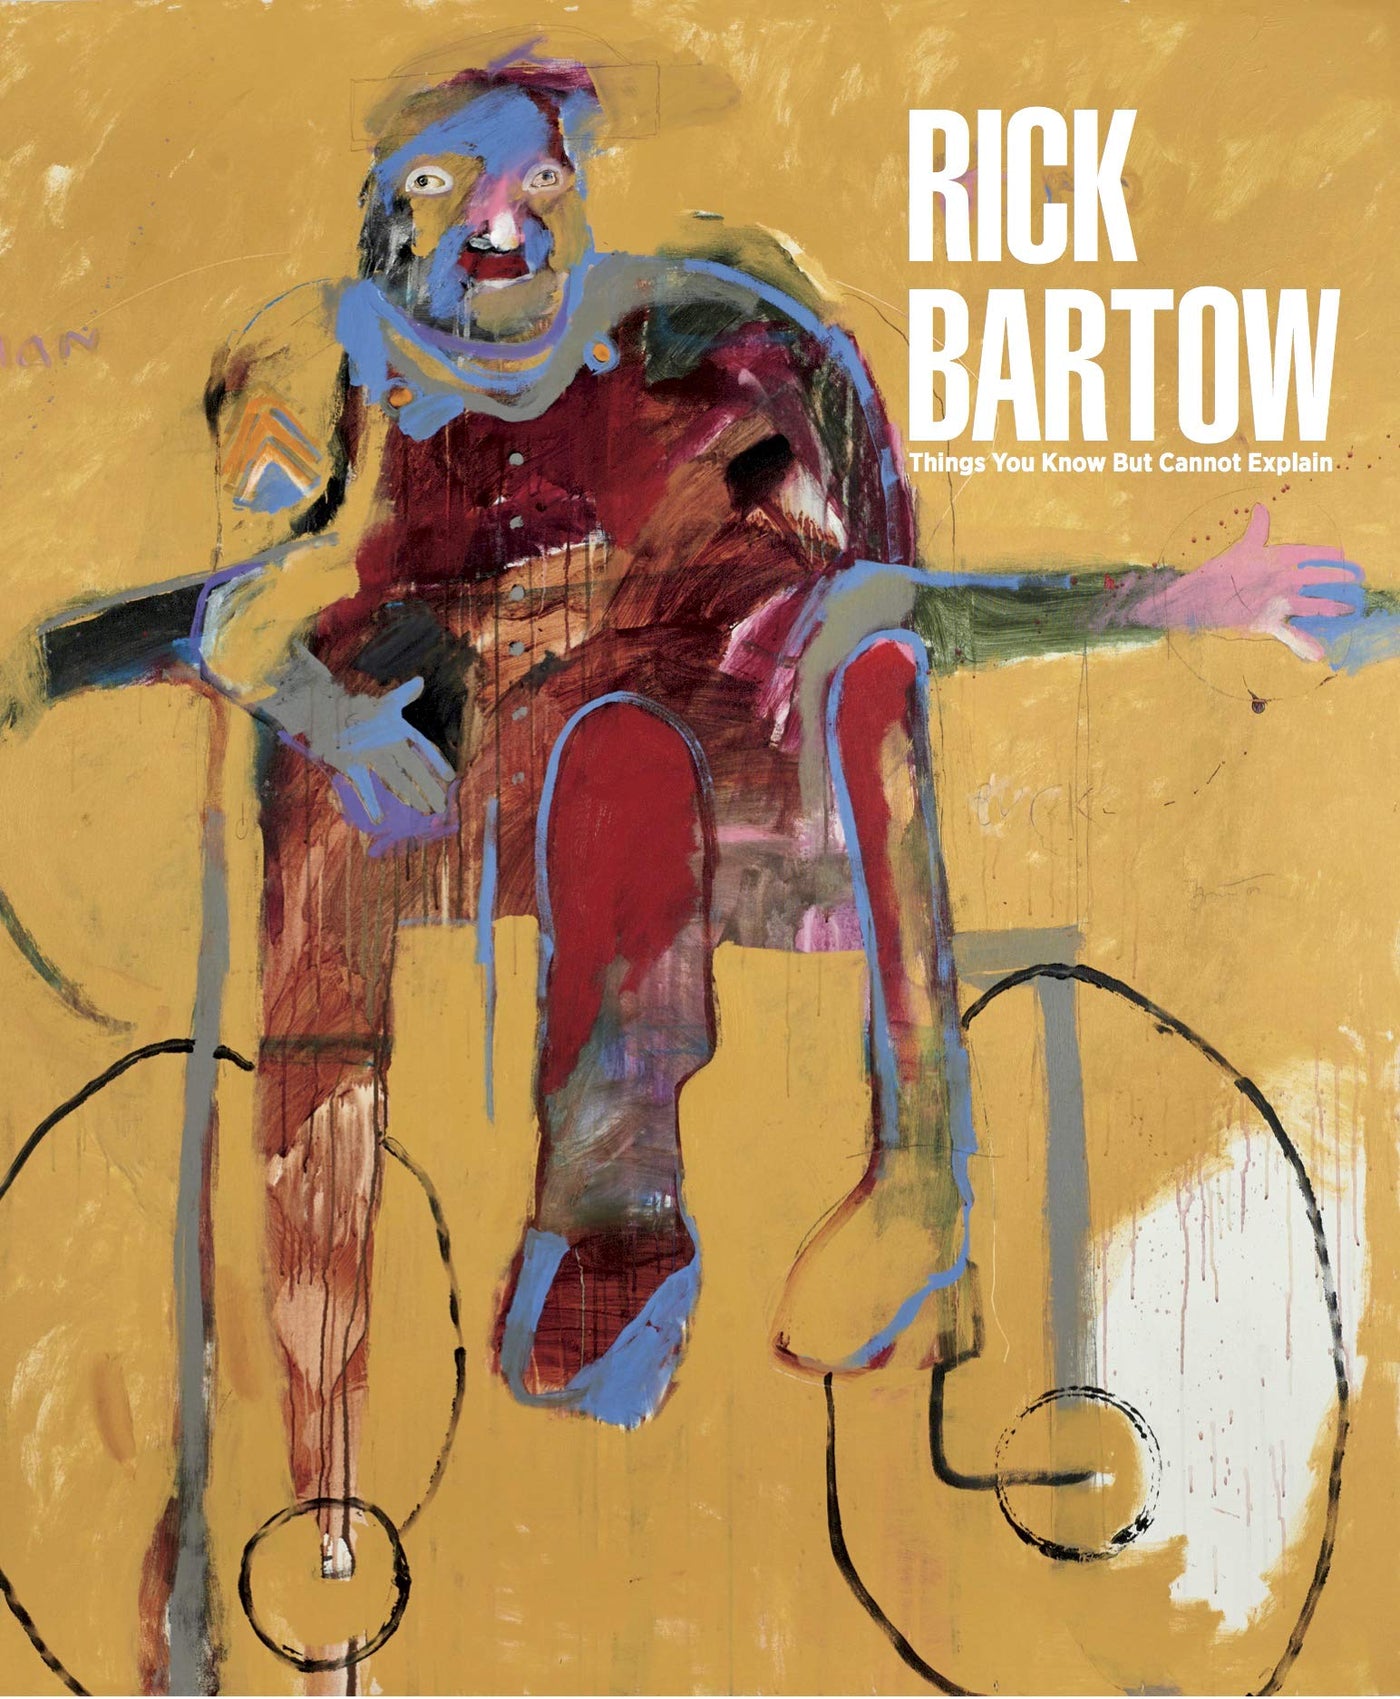 Rick Bartow: Things You Know But Cannot Explain